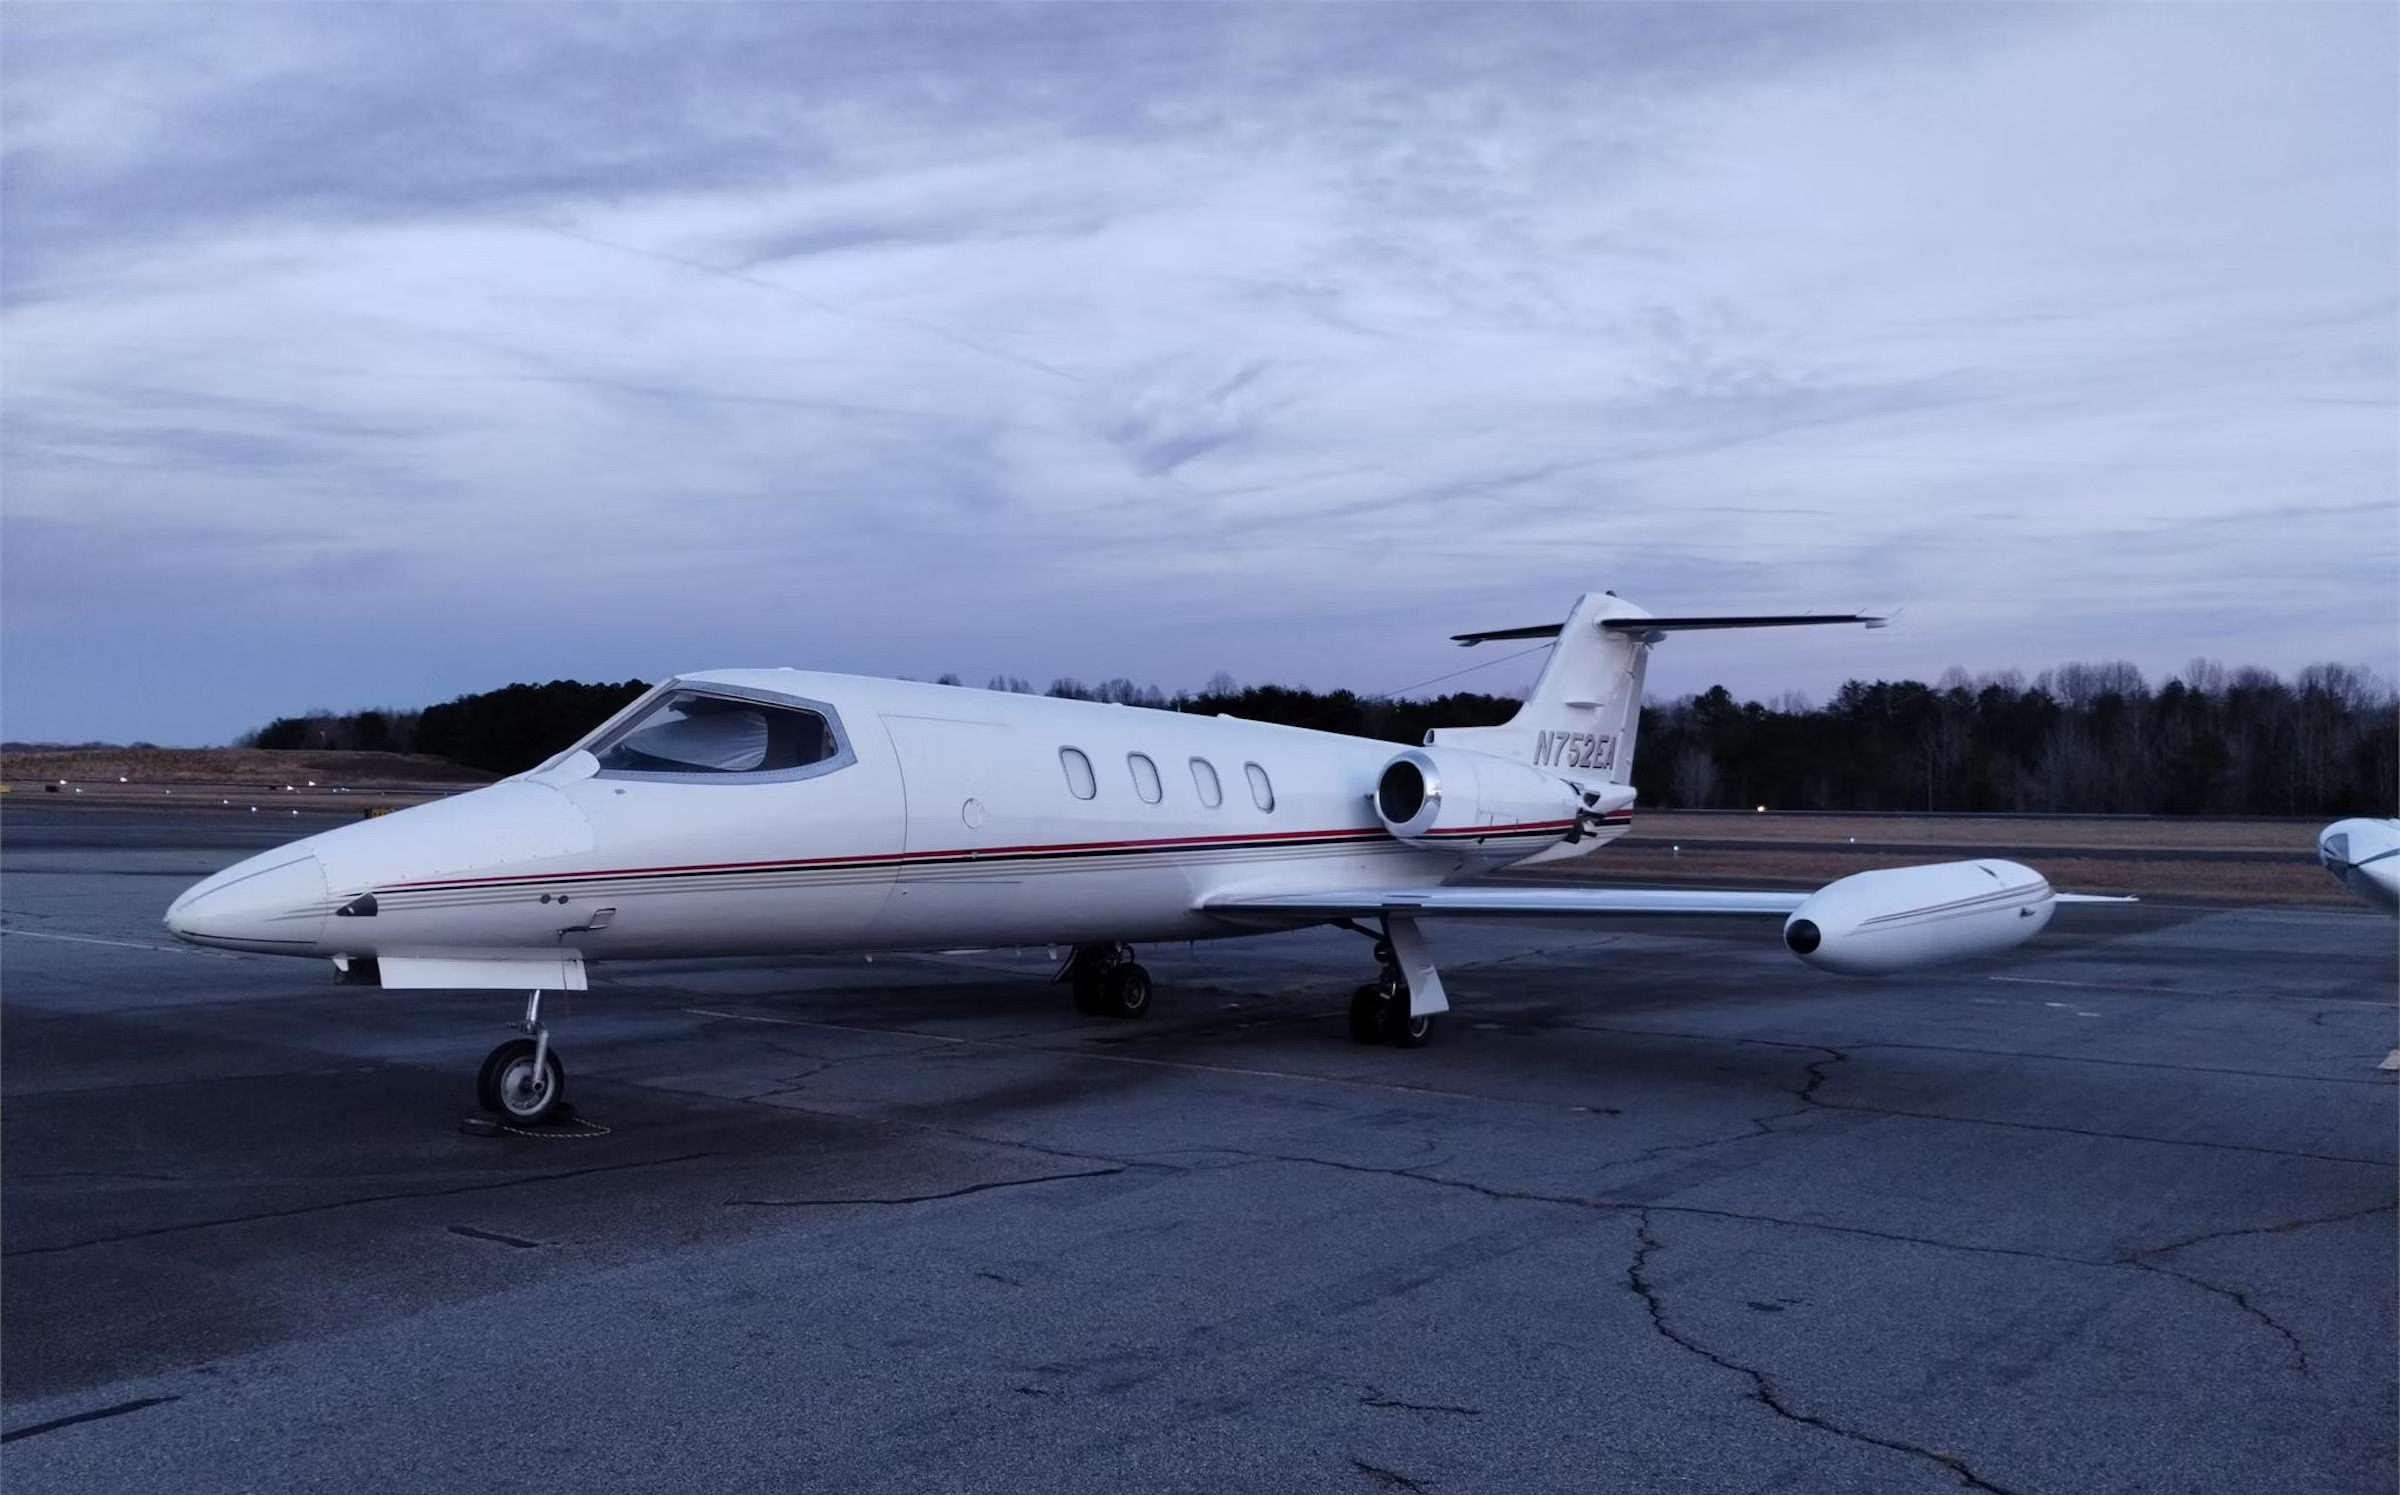 This 1973 Learjet 25B Is a Fast Celebrity-Linked ‘AircraftForSale’ Top Pick